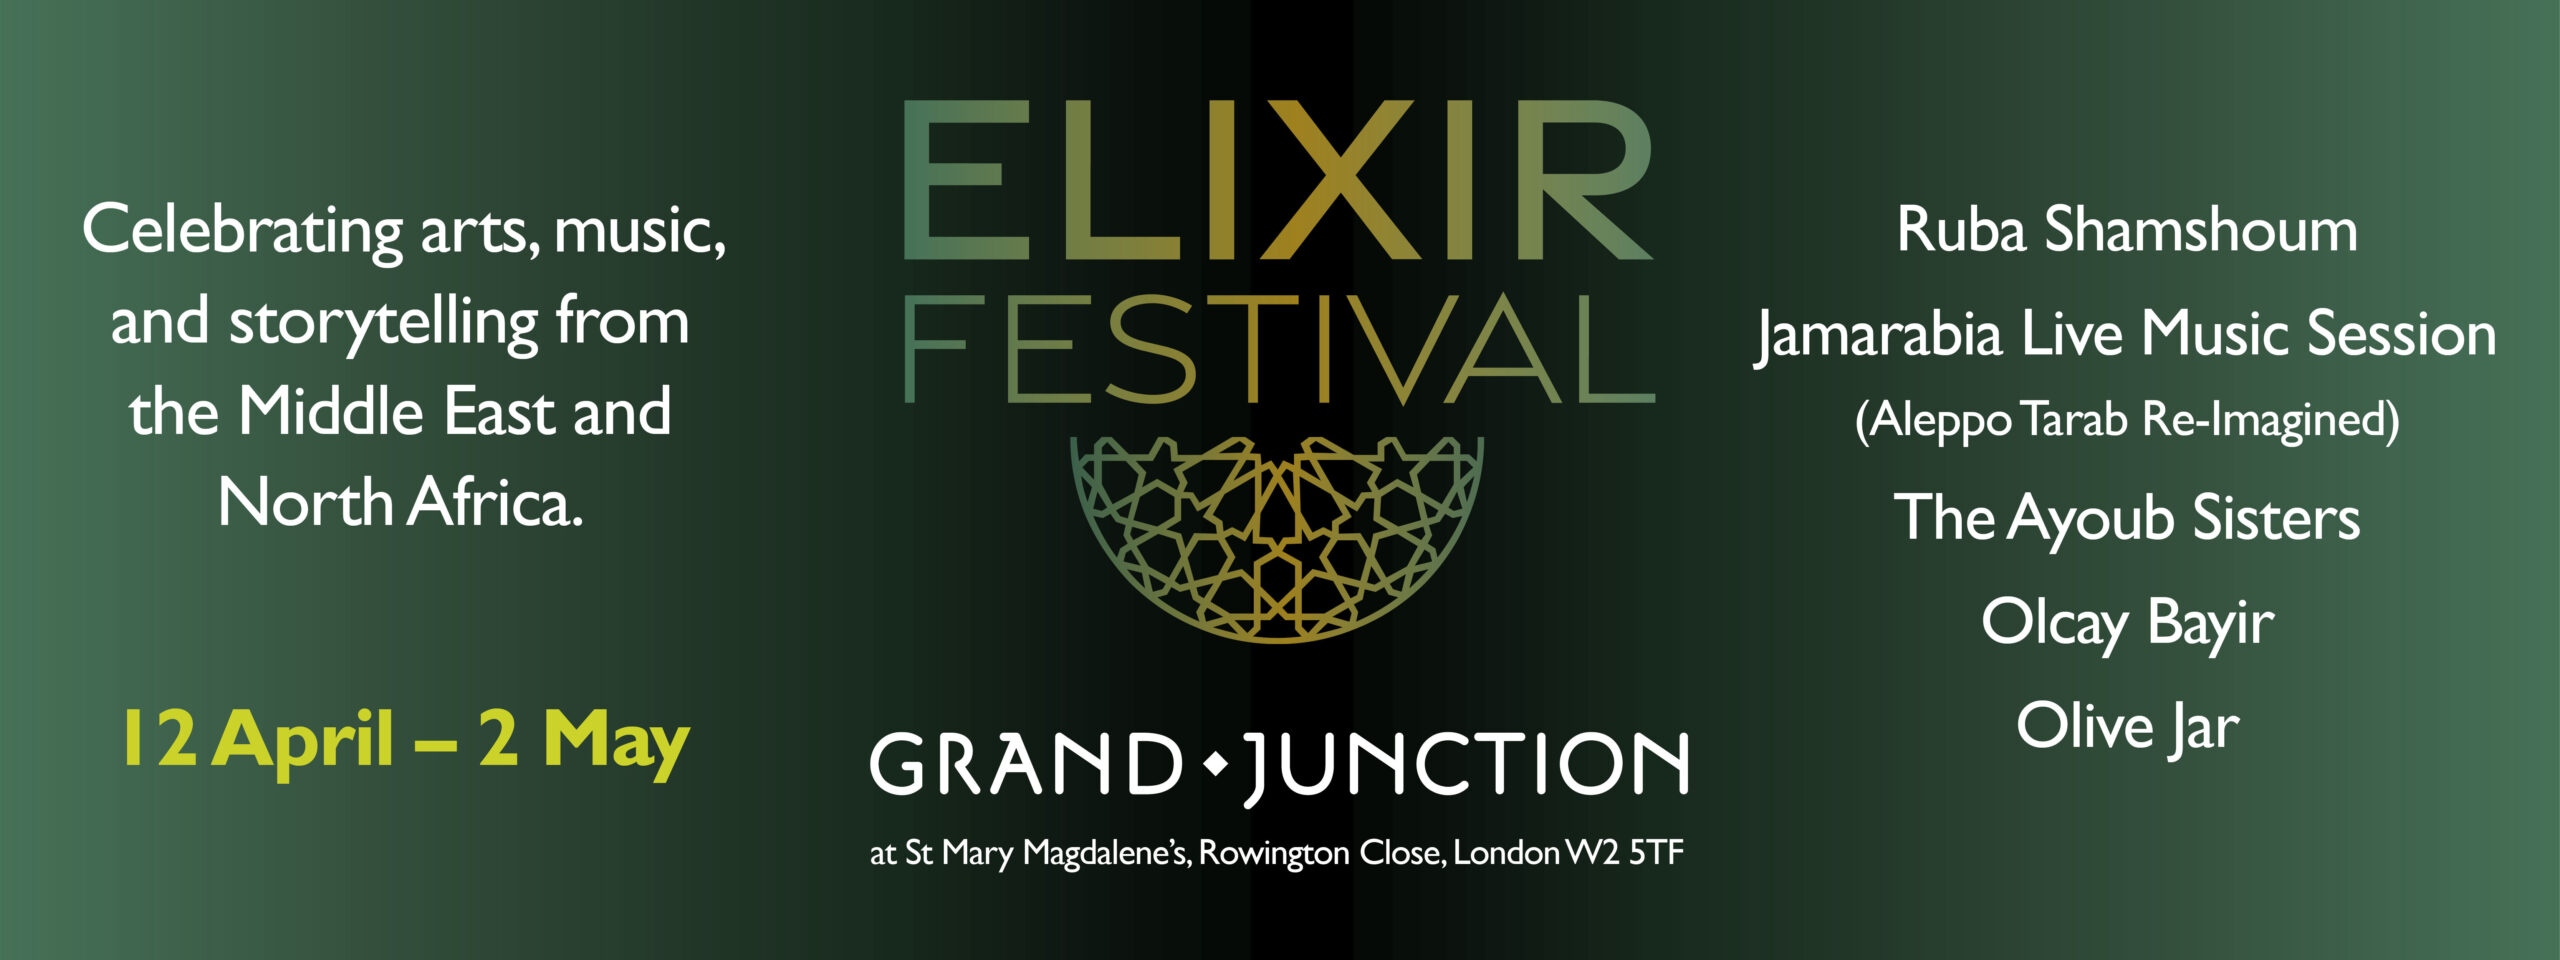 Elixir Festival logo on a green background with information about the festival at Grand Junction. Left side text: Celebrating arts, music, and storytelling from Middle East and North Africa. 12 April - 2 May. Right side text: artists performing, Ruba Shamshoum, Aleppo Tarab; Re-imagined, The Ayoub Sisters, Olcay Bayir, Olive Jar and Young Shubbak